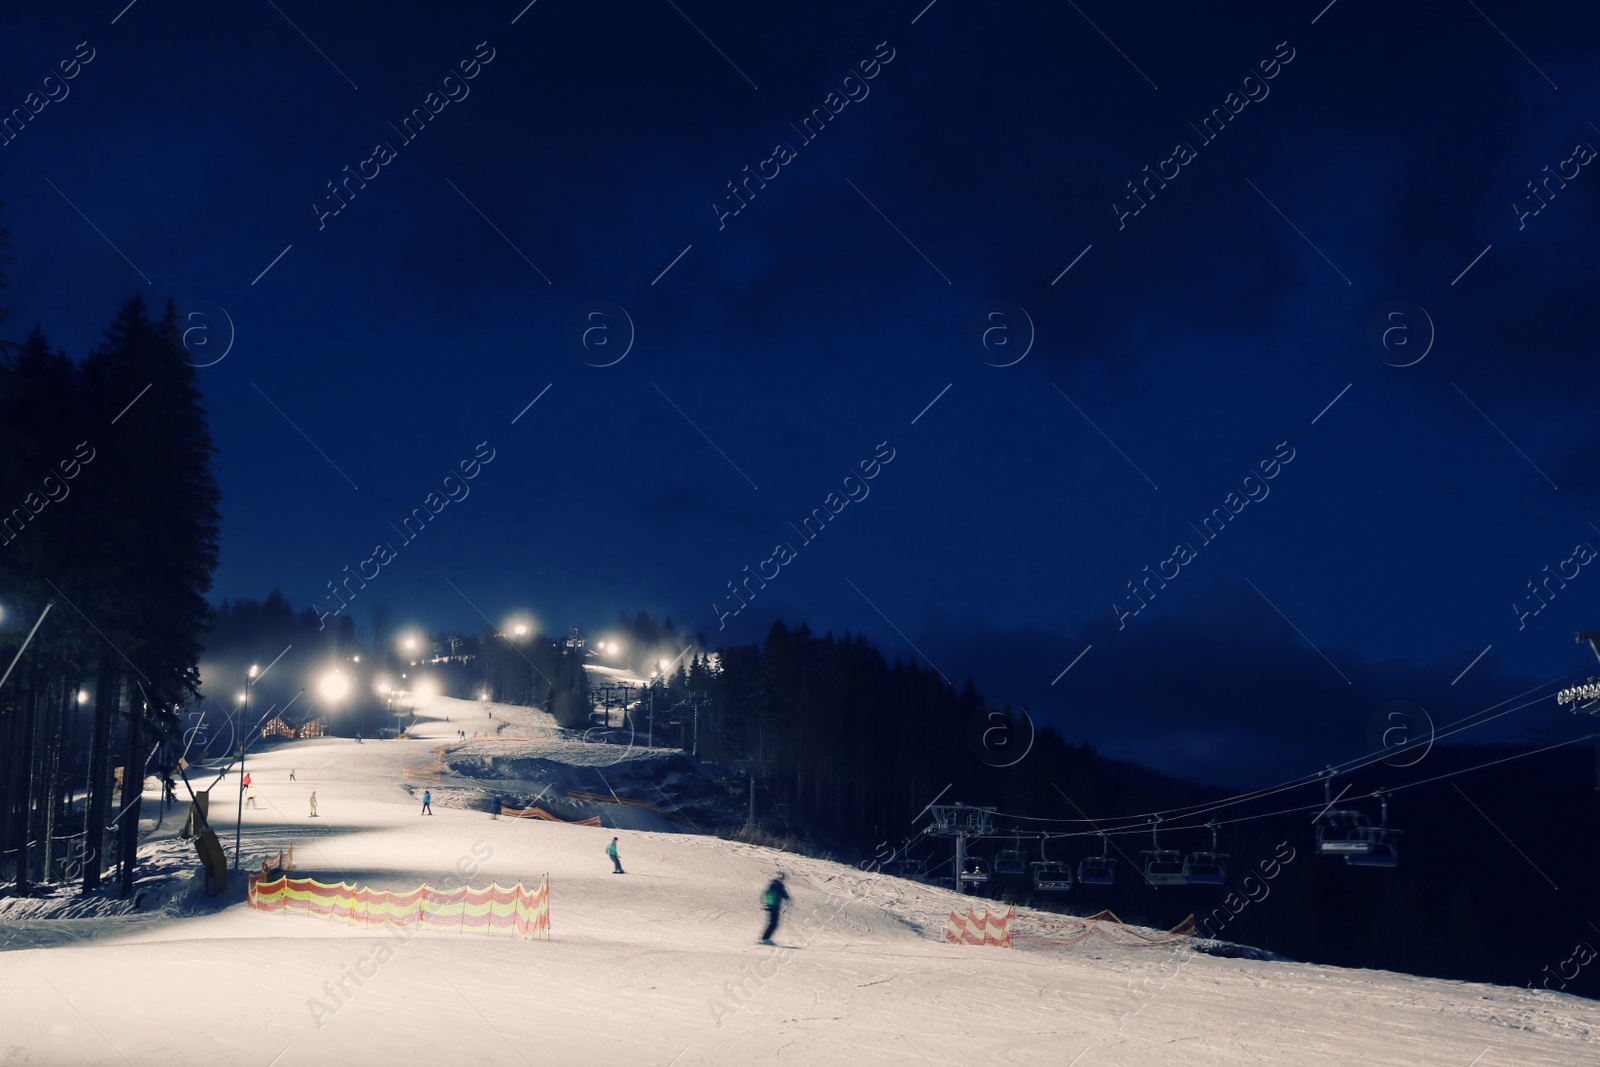 Photo of People skiing on snowy piste at night. Winter vacation